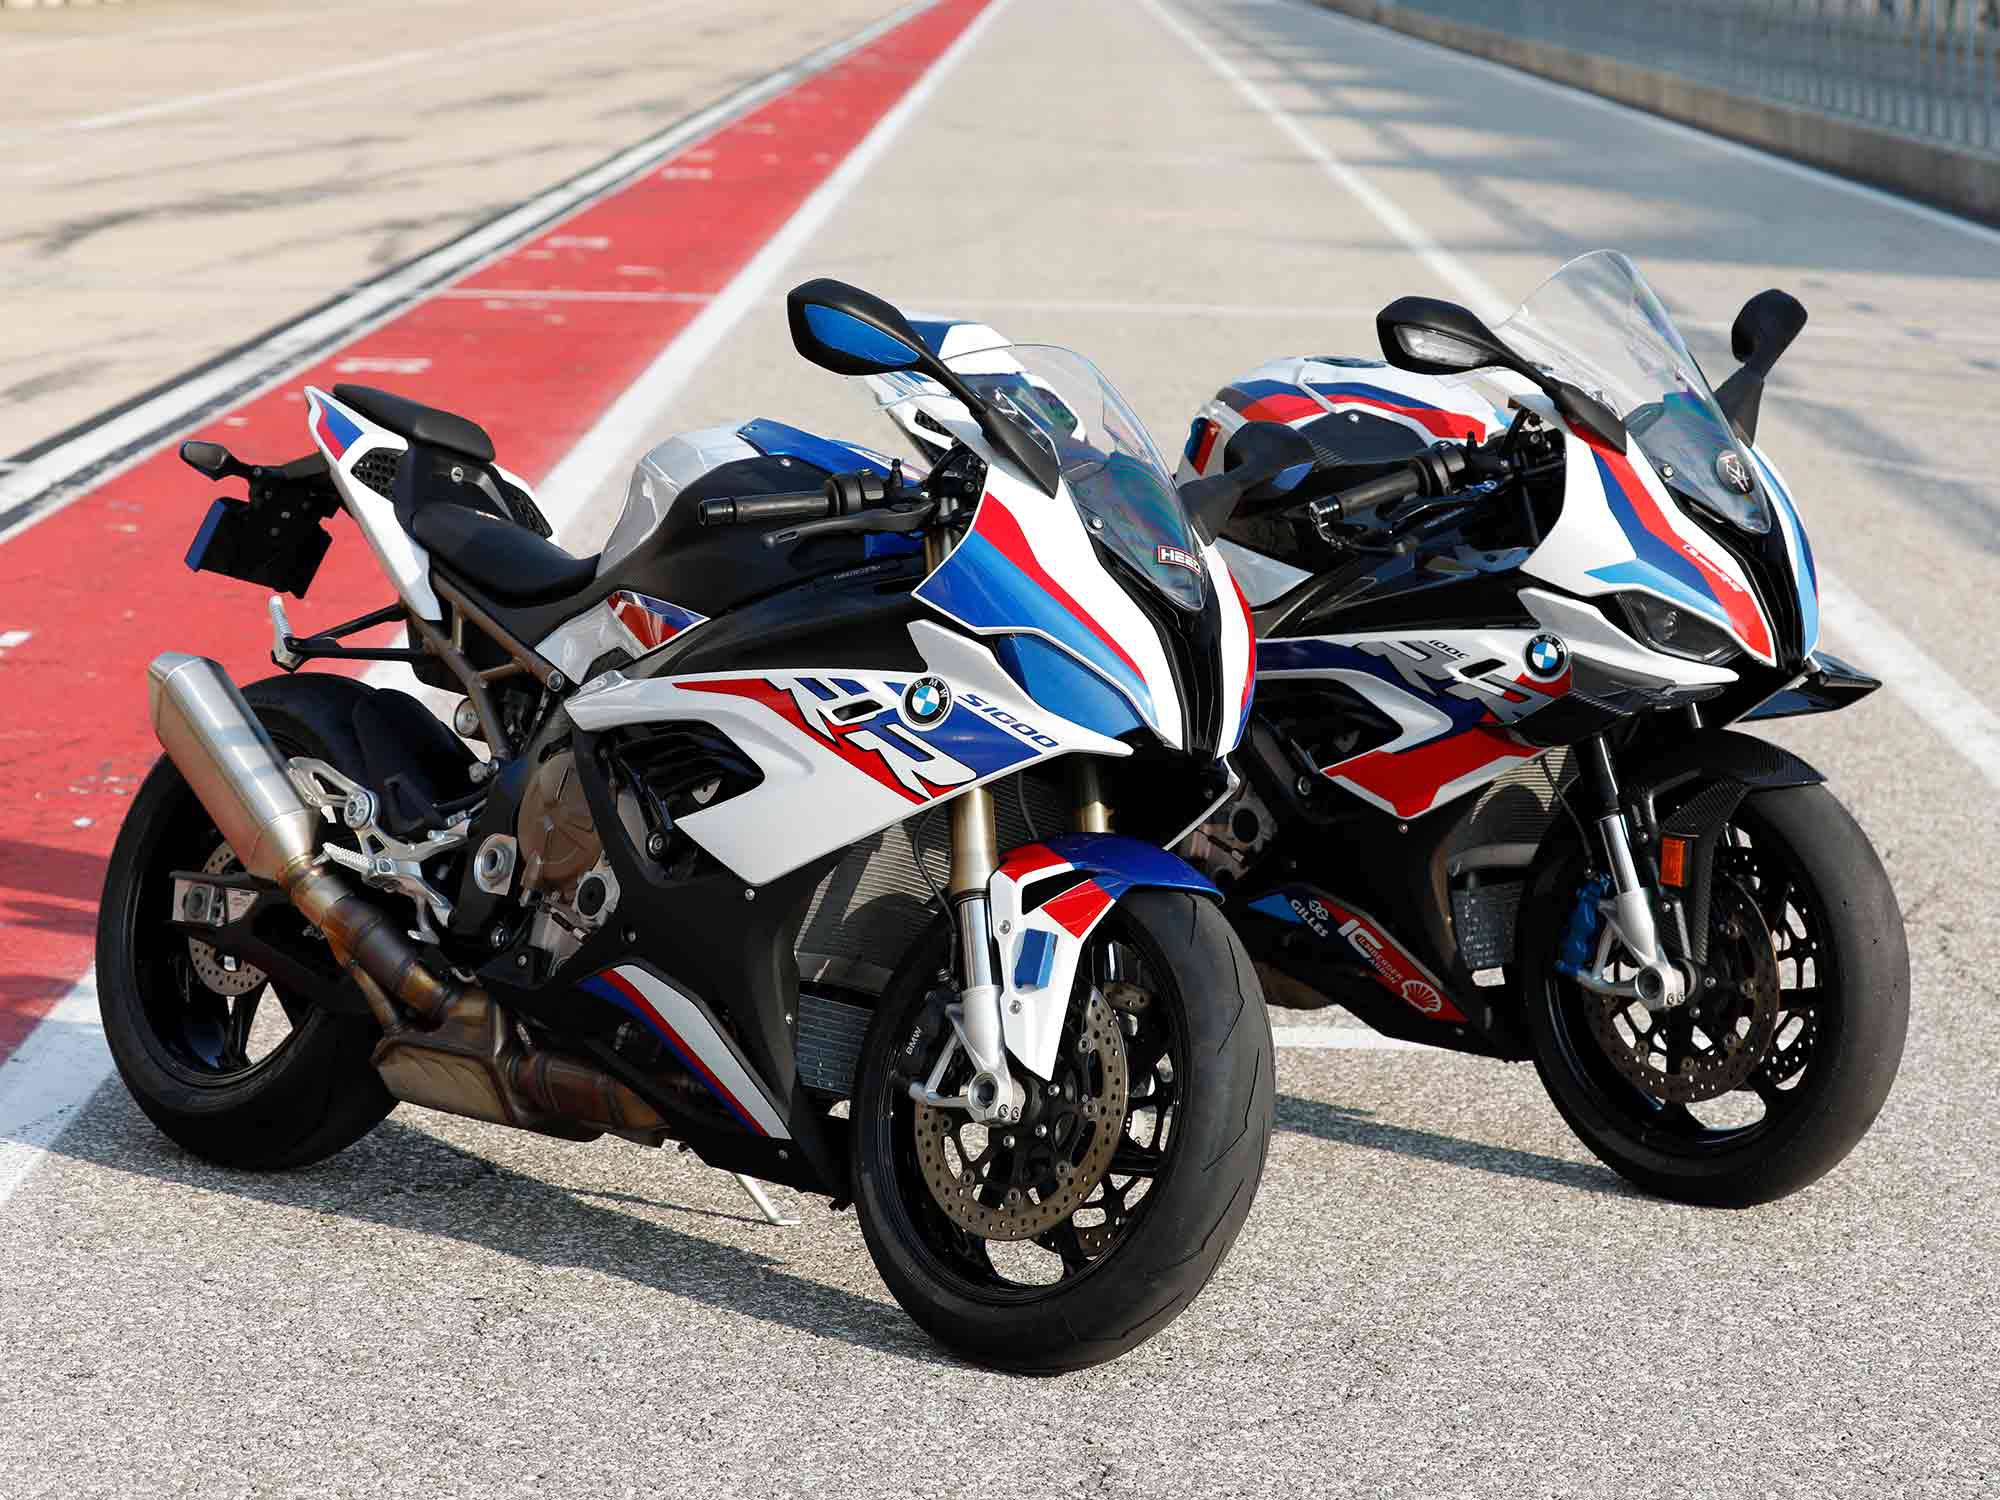 If you’re looking to experience the thrill of BMW S 1000 RR’s superbike with like-minded sportbike riders a trip to Double R Fest is worthwhile.